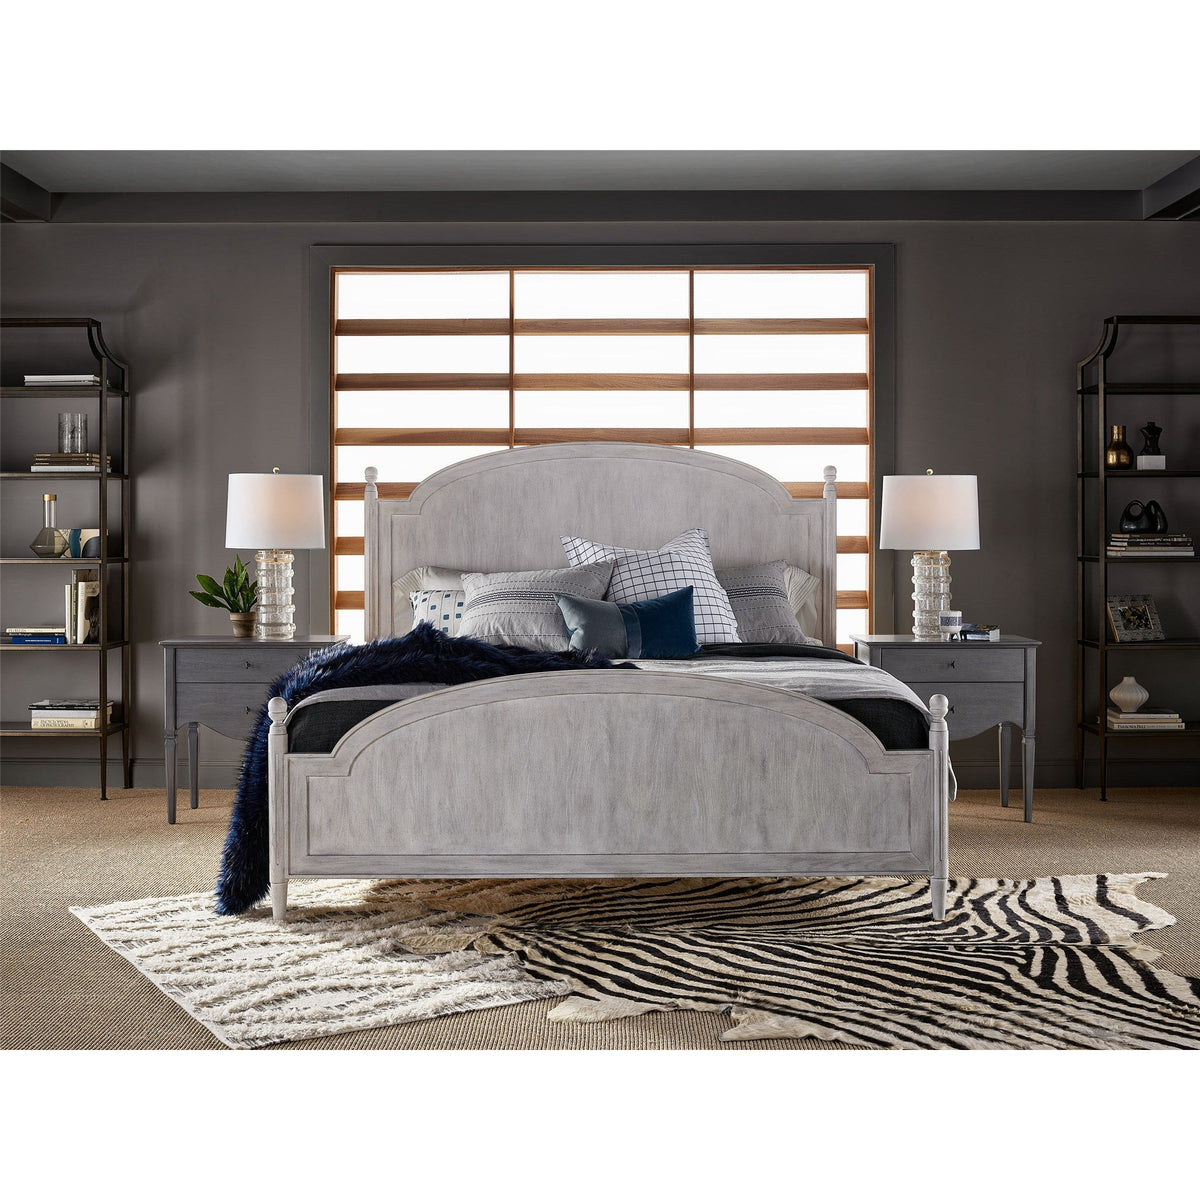 Pryce Panel Bed - Be Bold Furniture